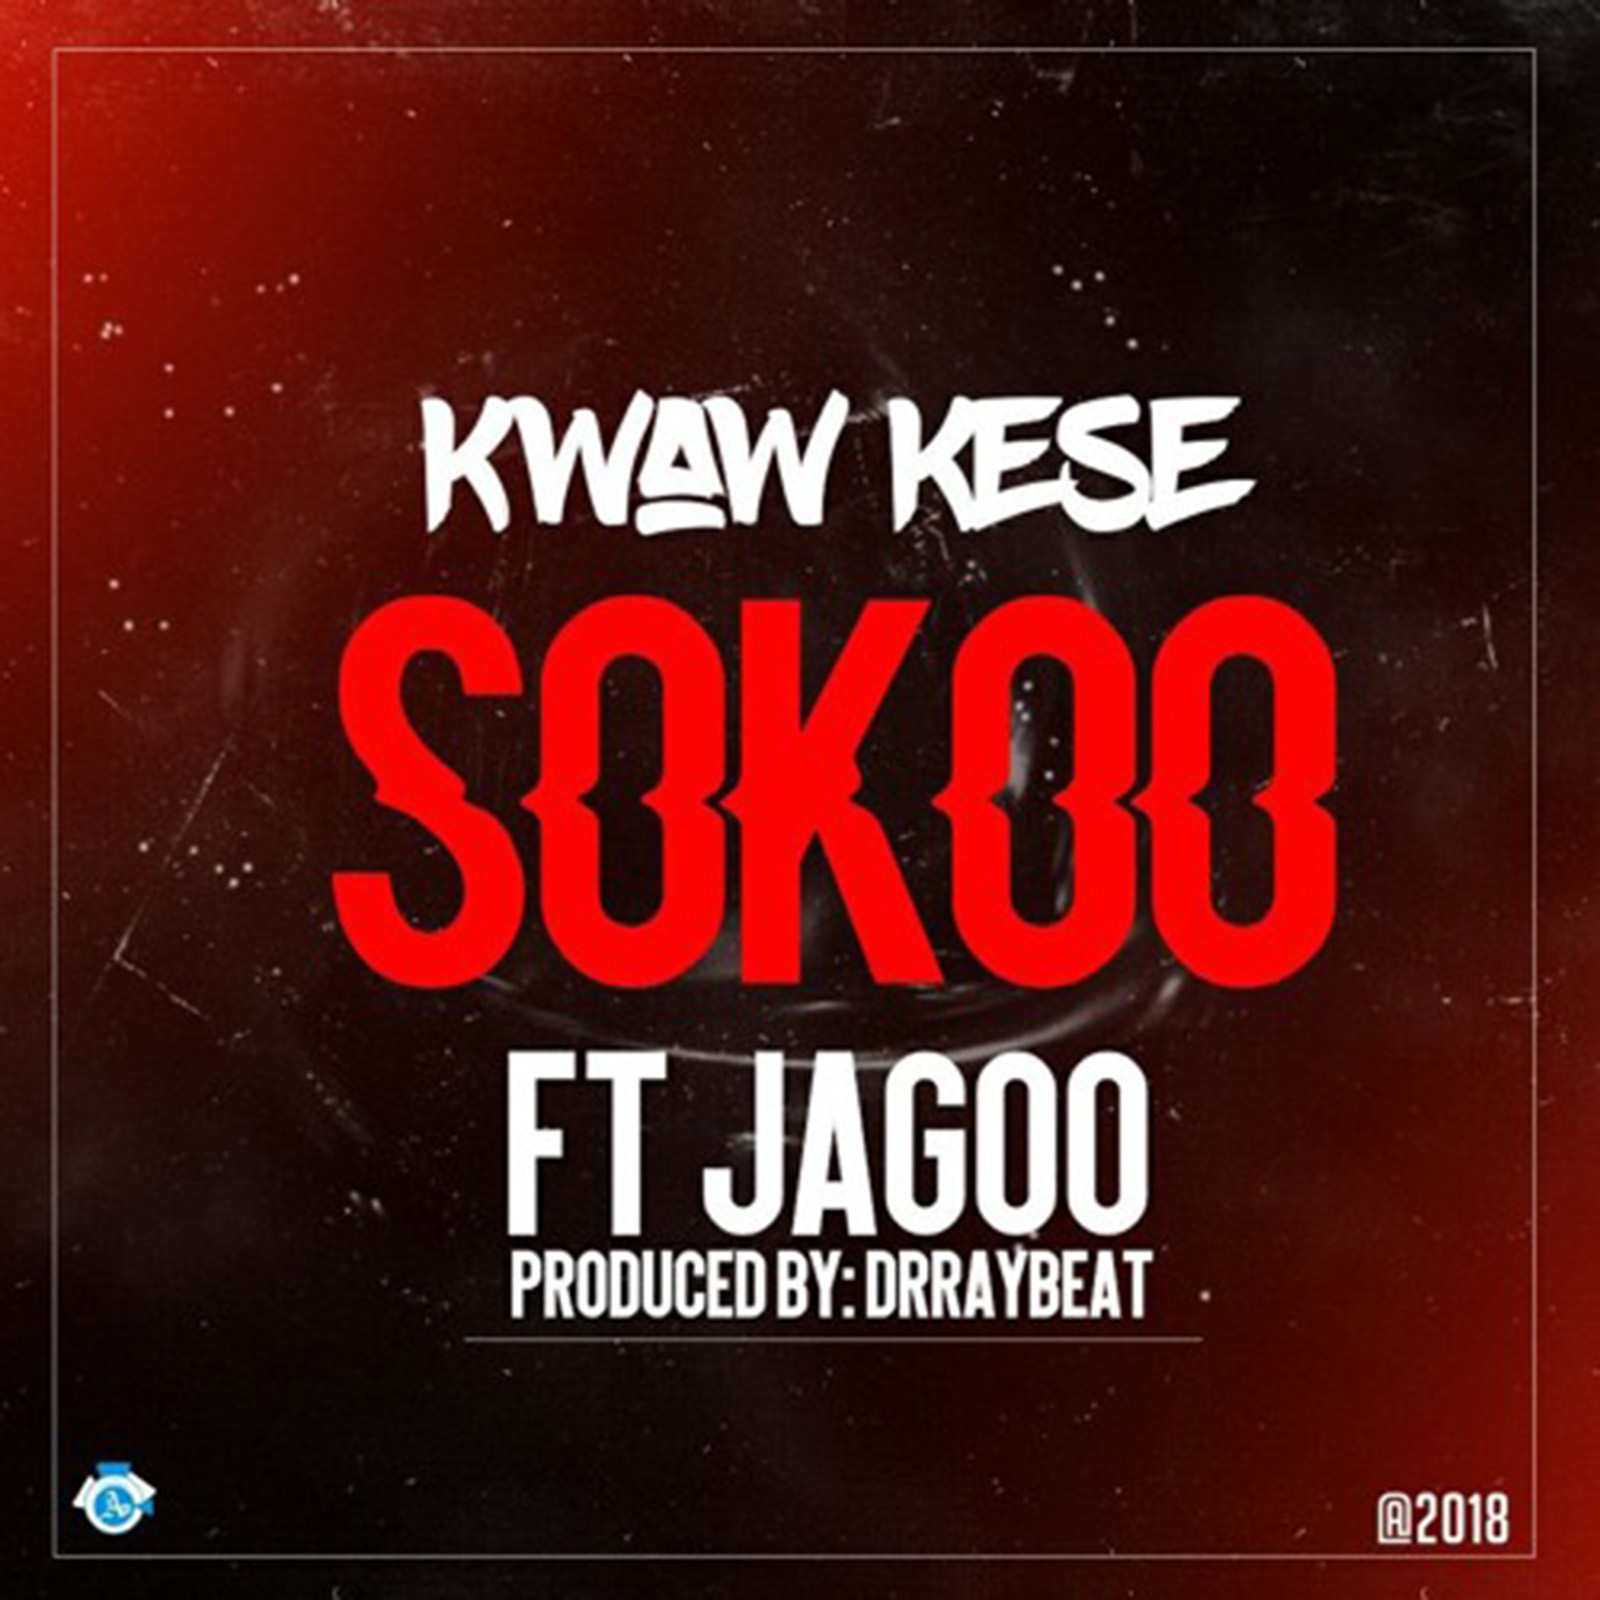 Sokoo by Kwaw Kese